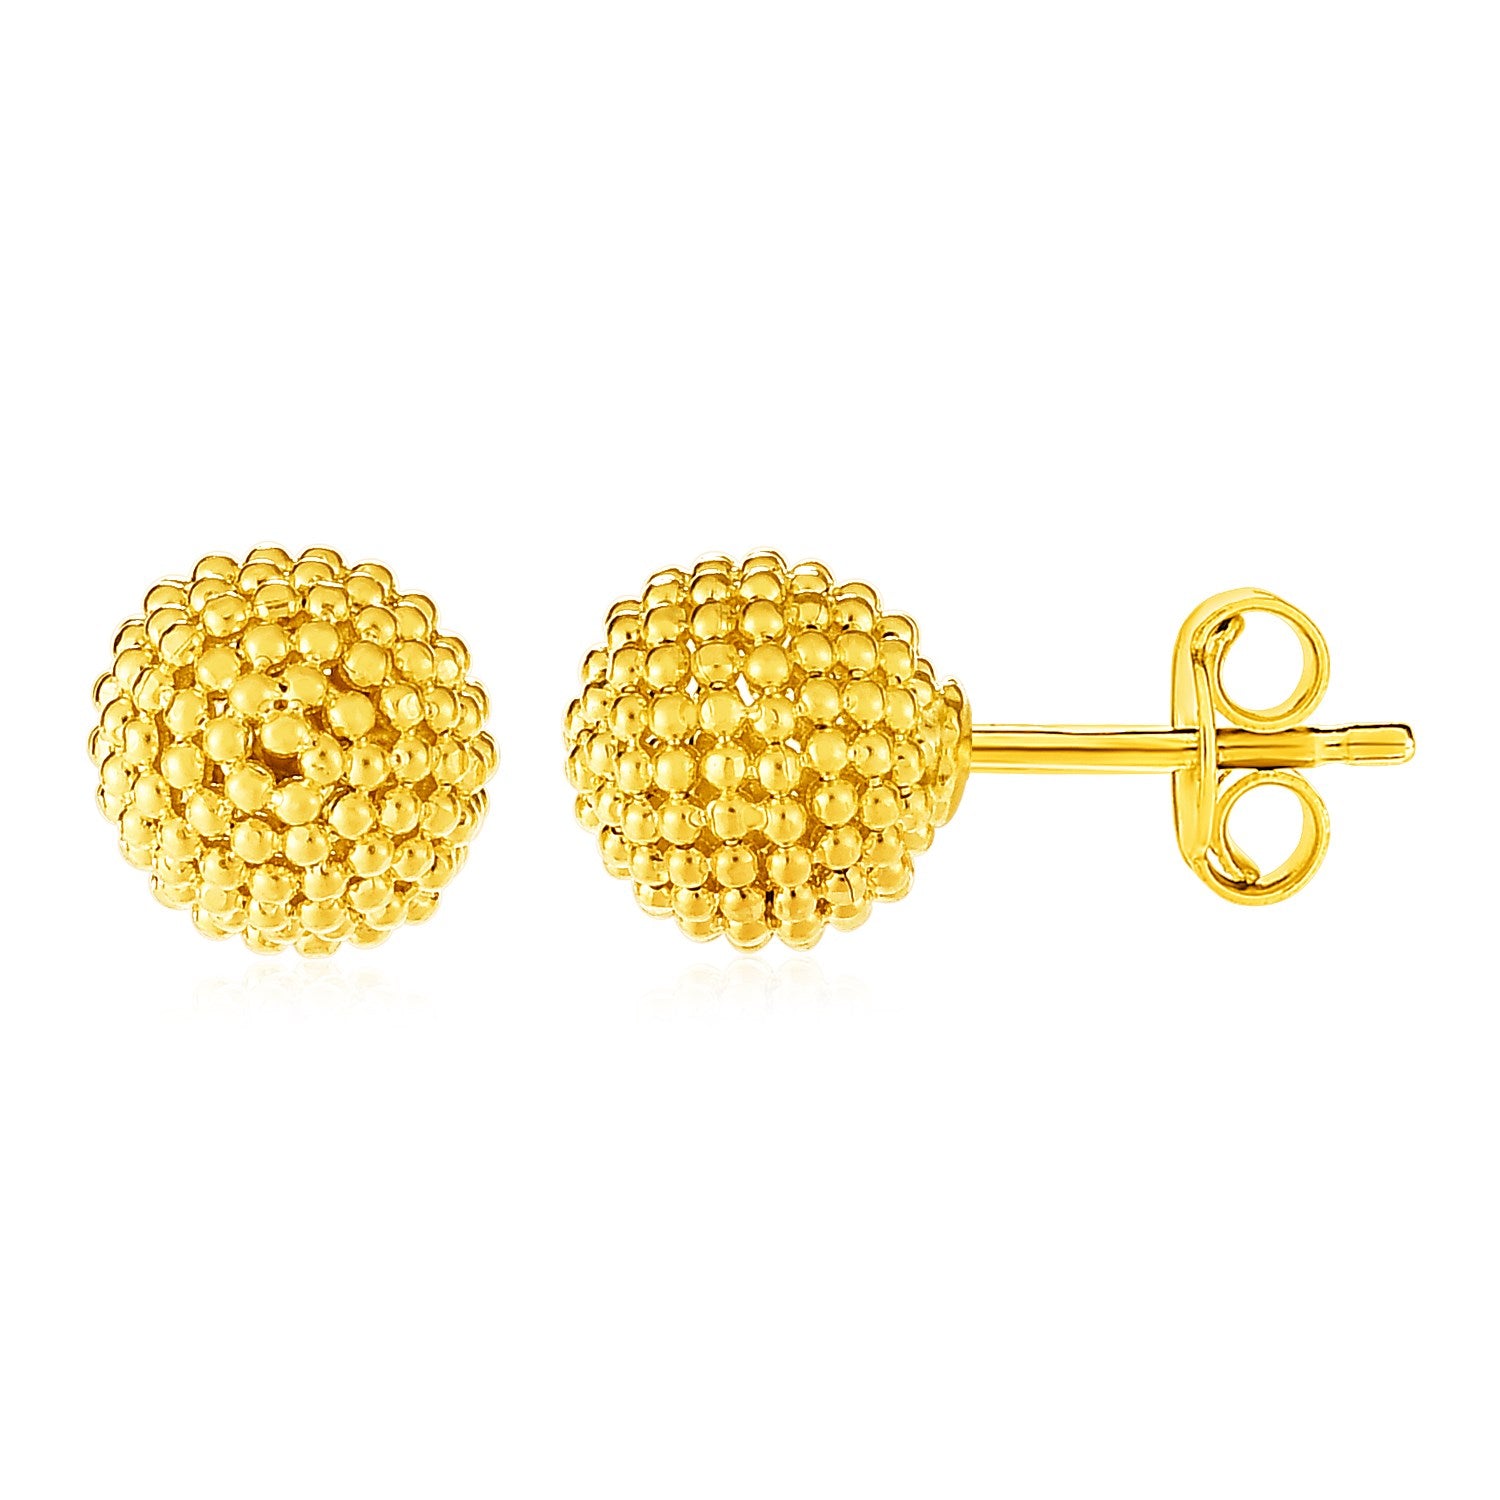 14k Yellow Gold Post Earrings with Beaded Spheres